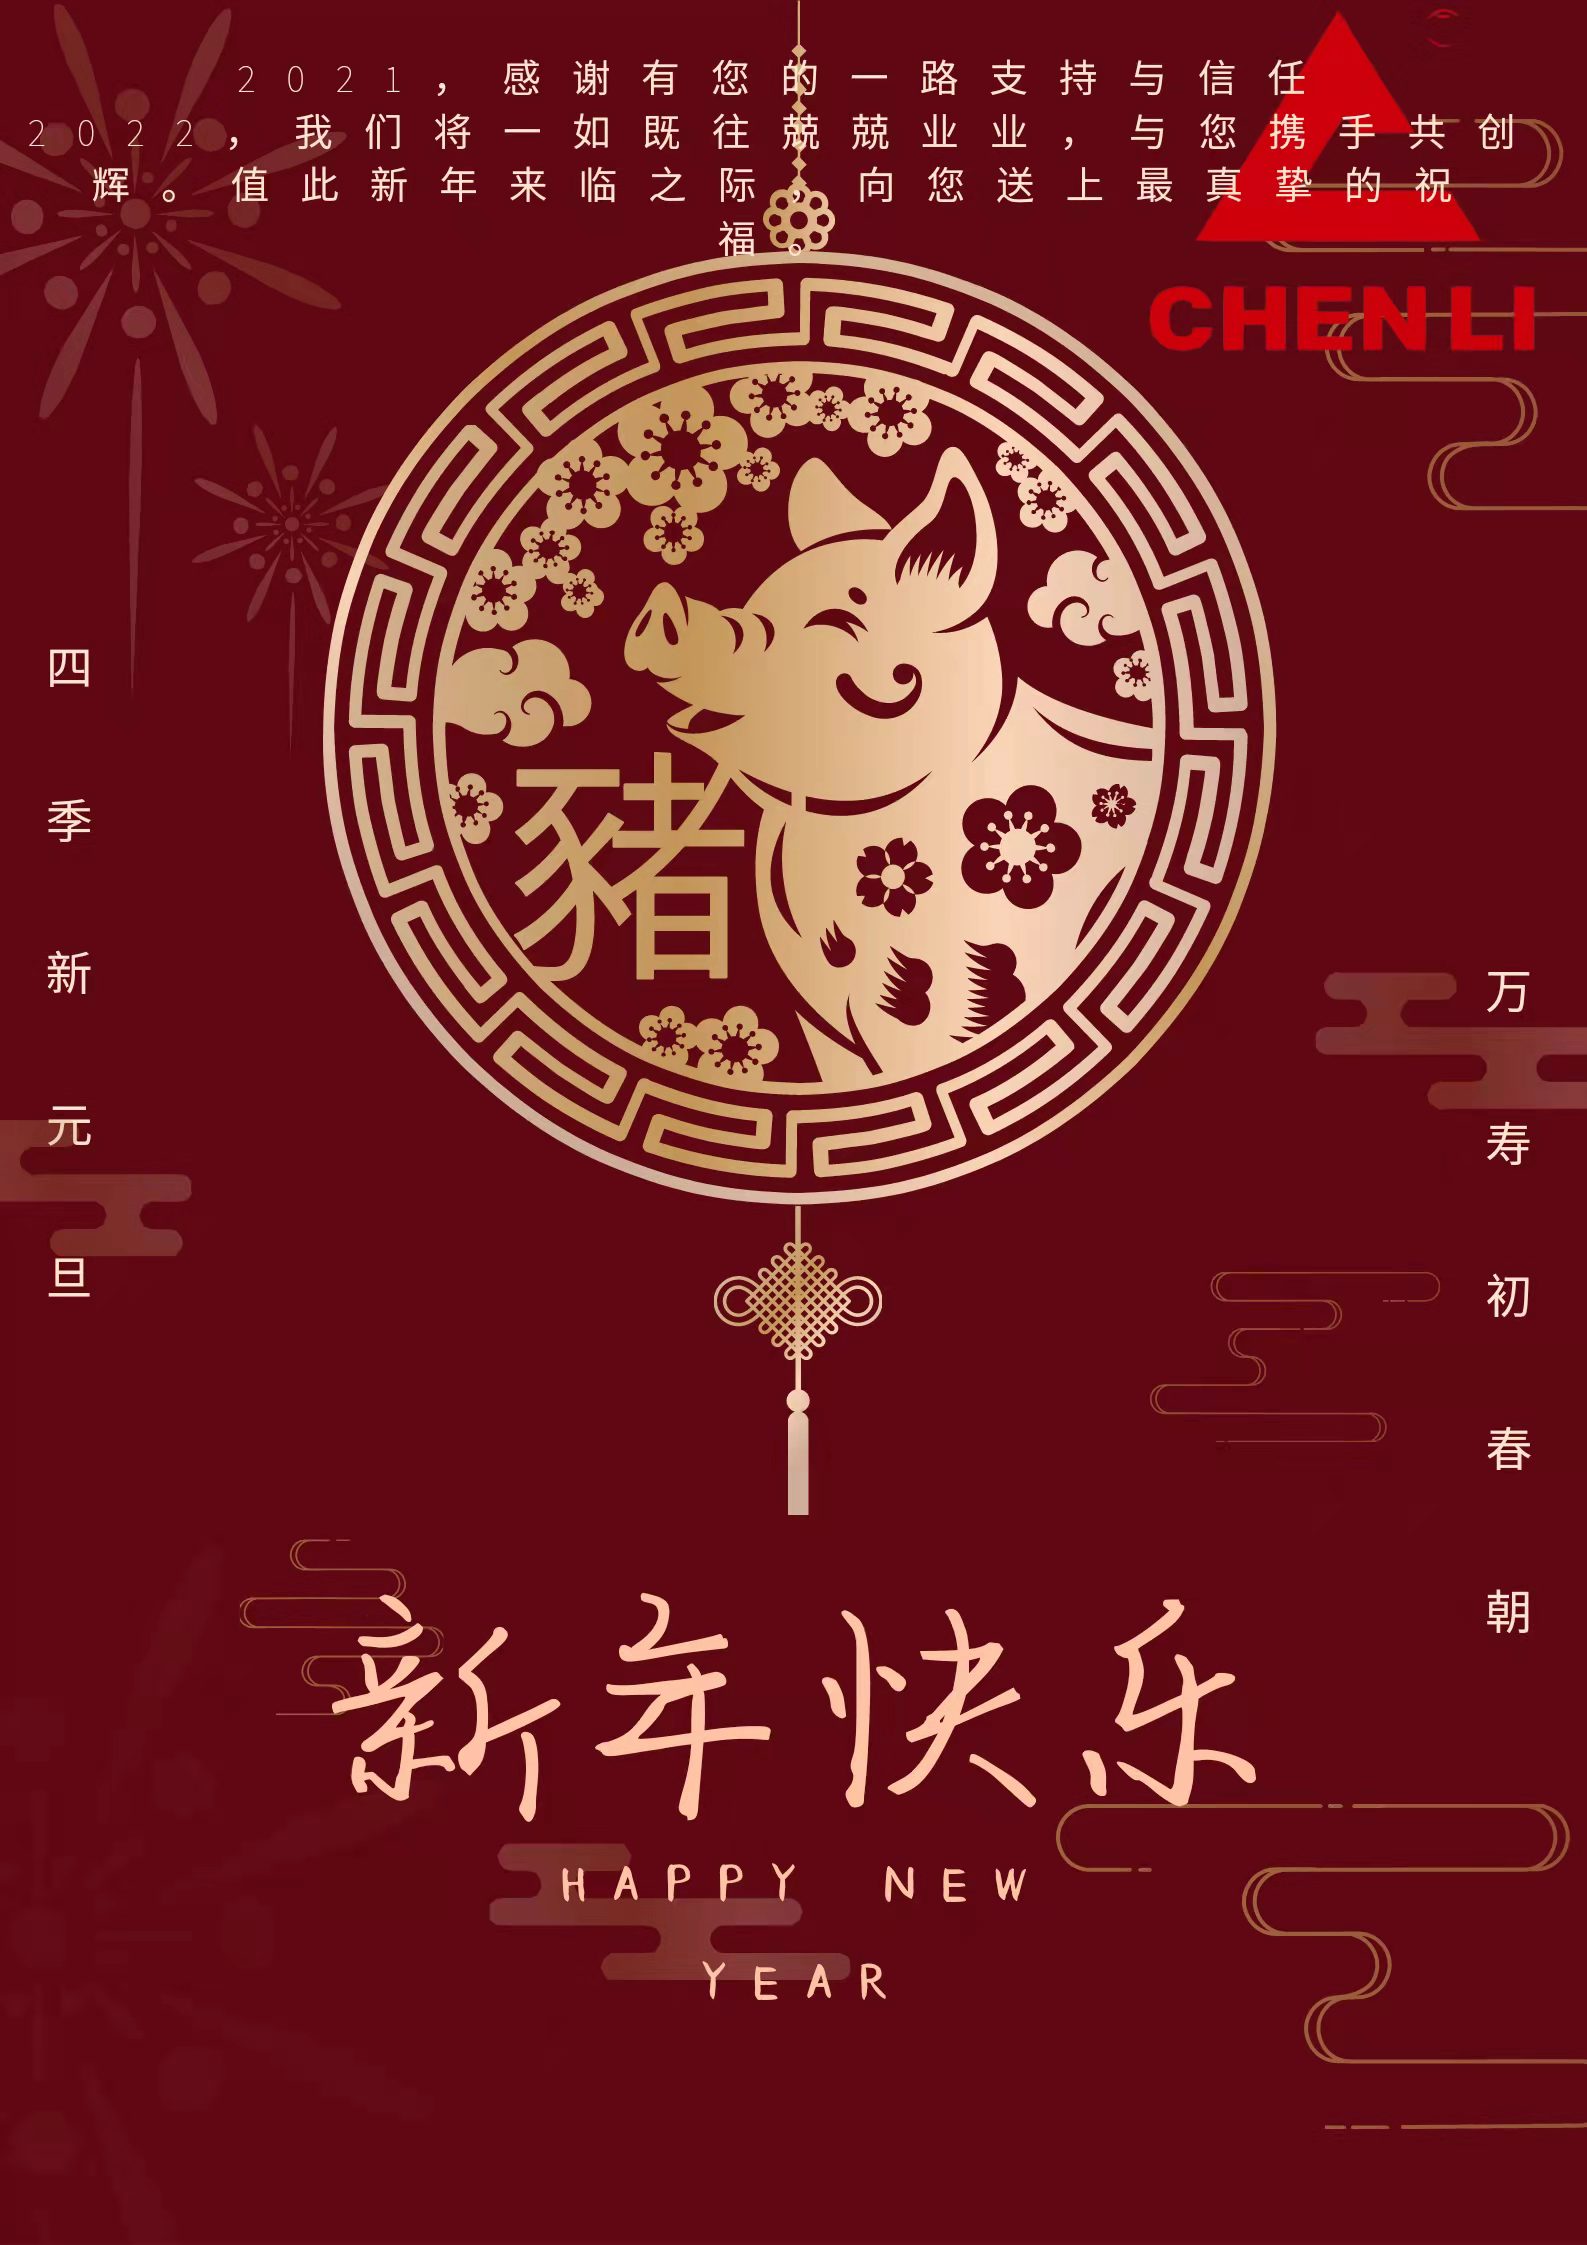 Happy Spring Festival and good luck in the year of the tiger!!!